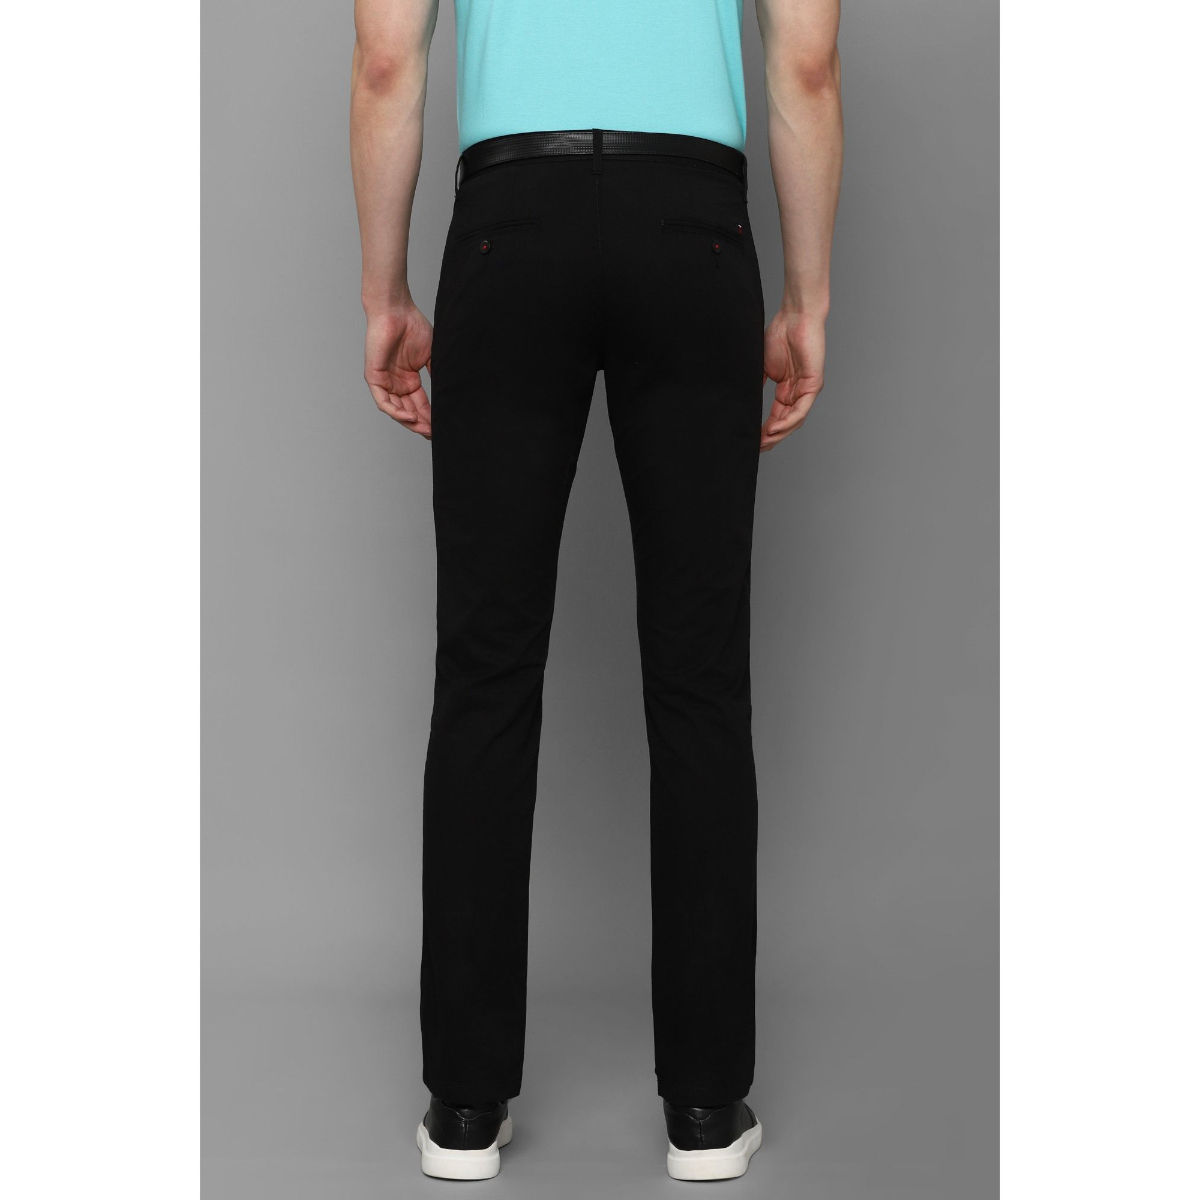 Buy Louis Philippe Black Trousers Online  811086  Louis Philippe